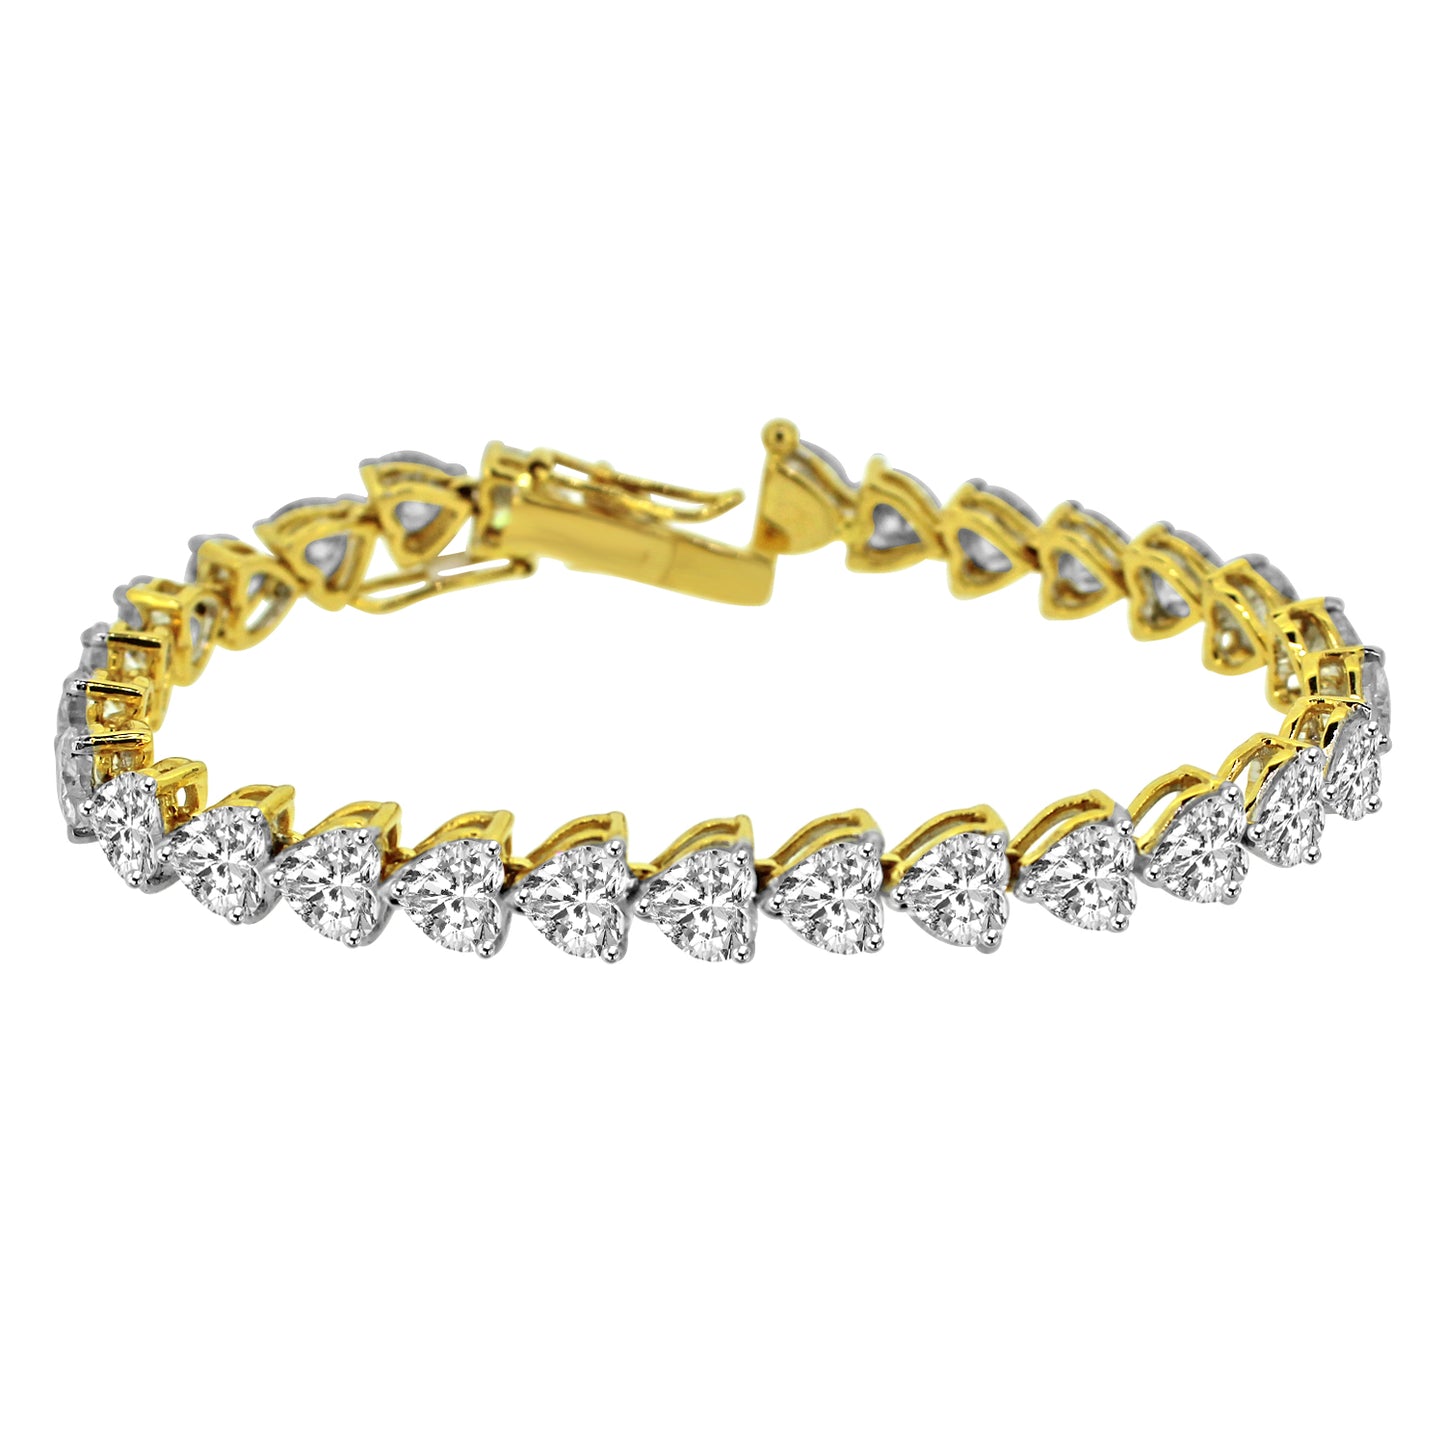 Baguette Moissanite Bracelet Famous Brand Factory in Silver Solid Gold  Large in Stock for Sale - China Silver Jewelry and Baguette Moissanite  Bracelet price | Made-in-China.com